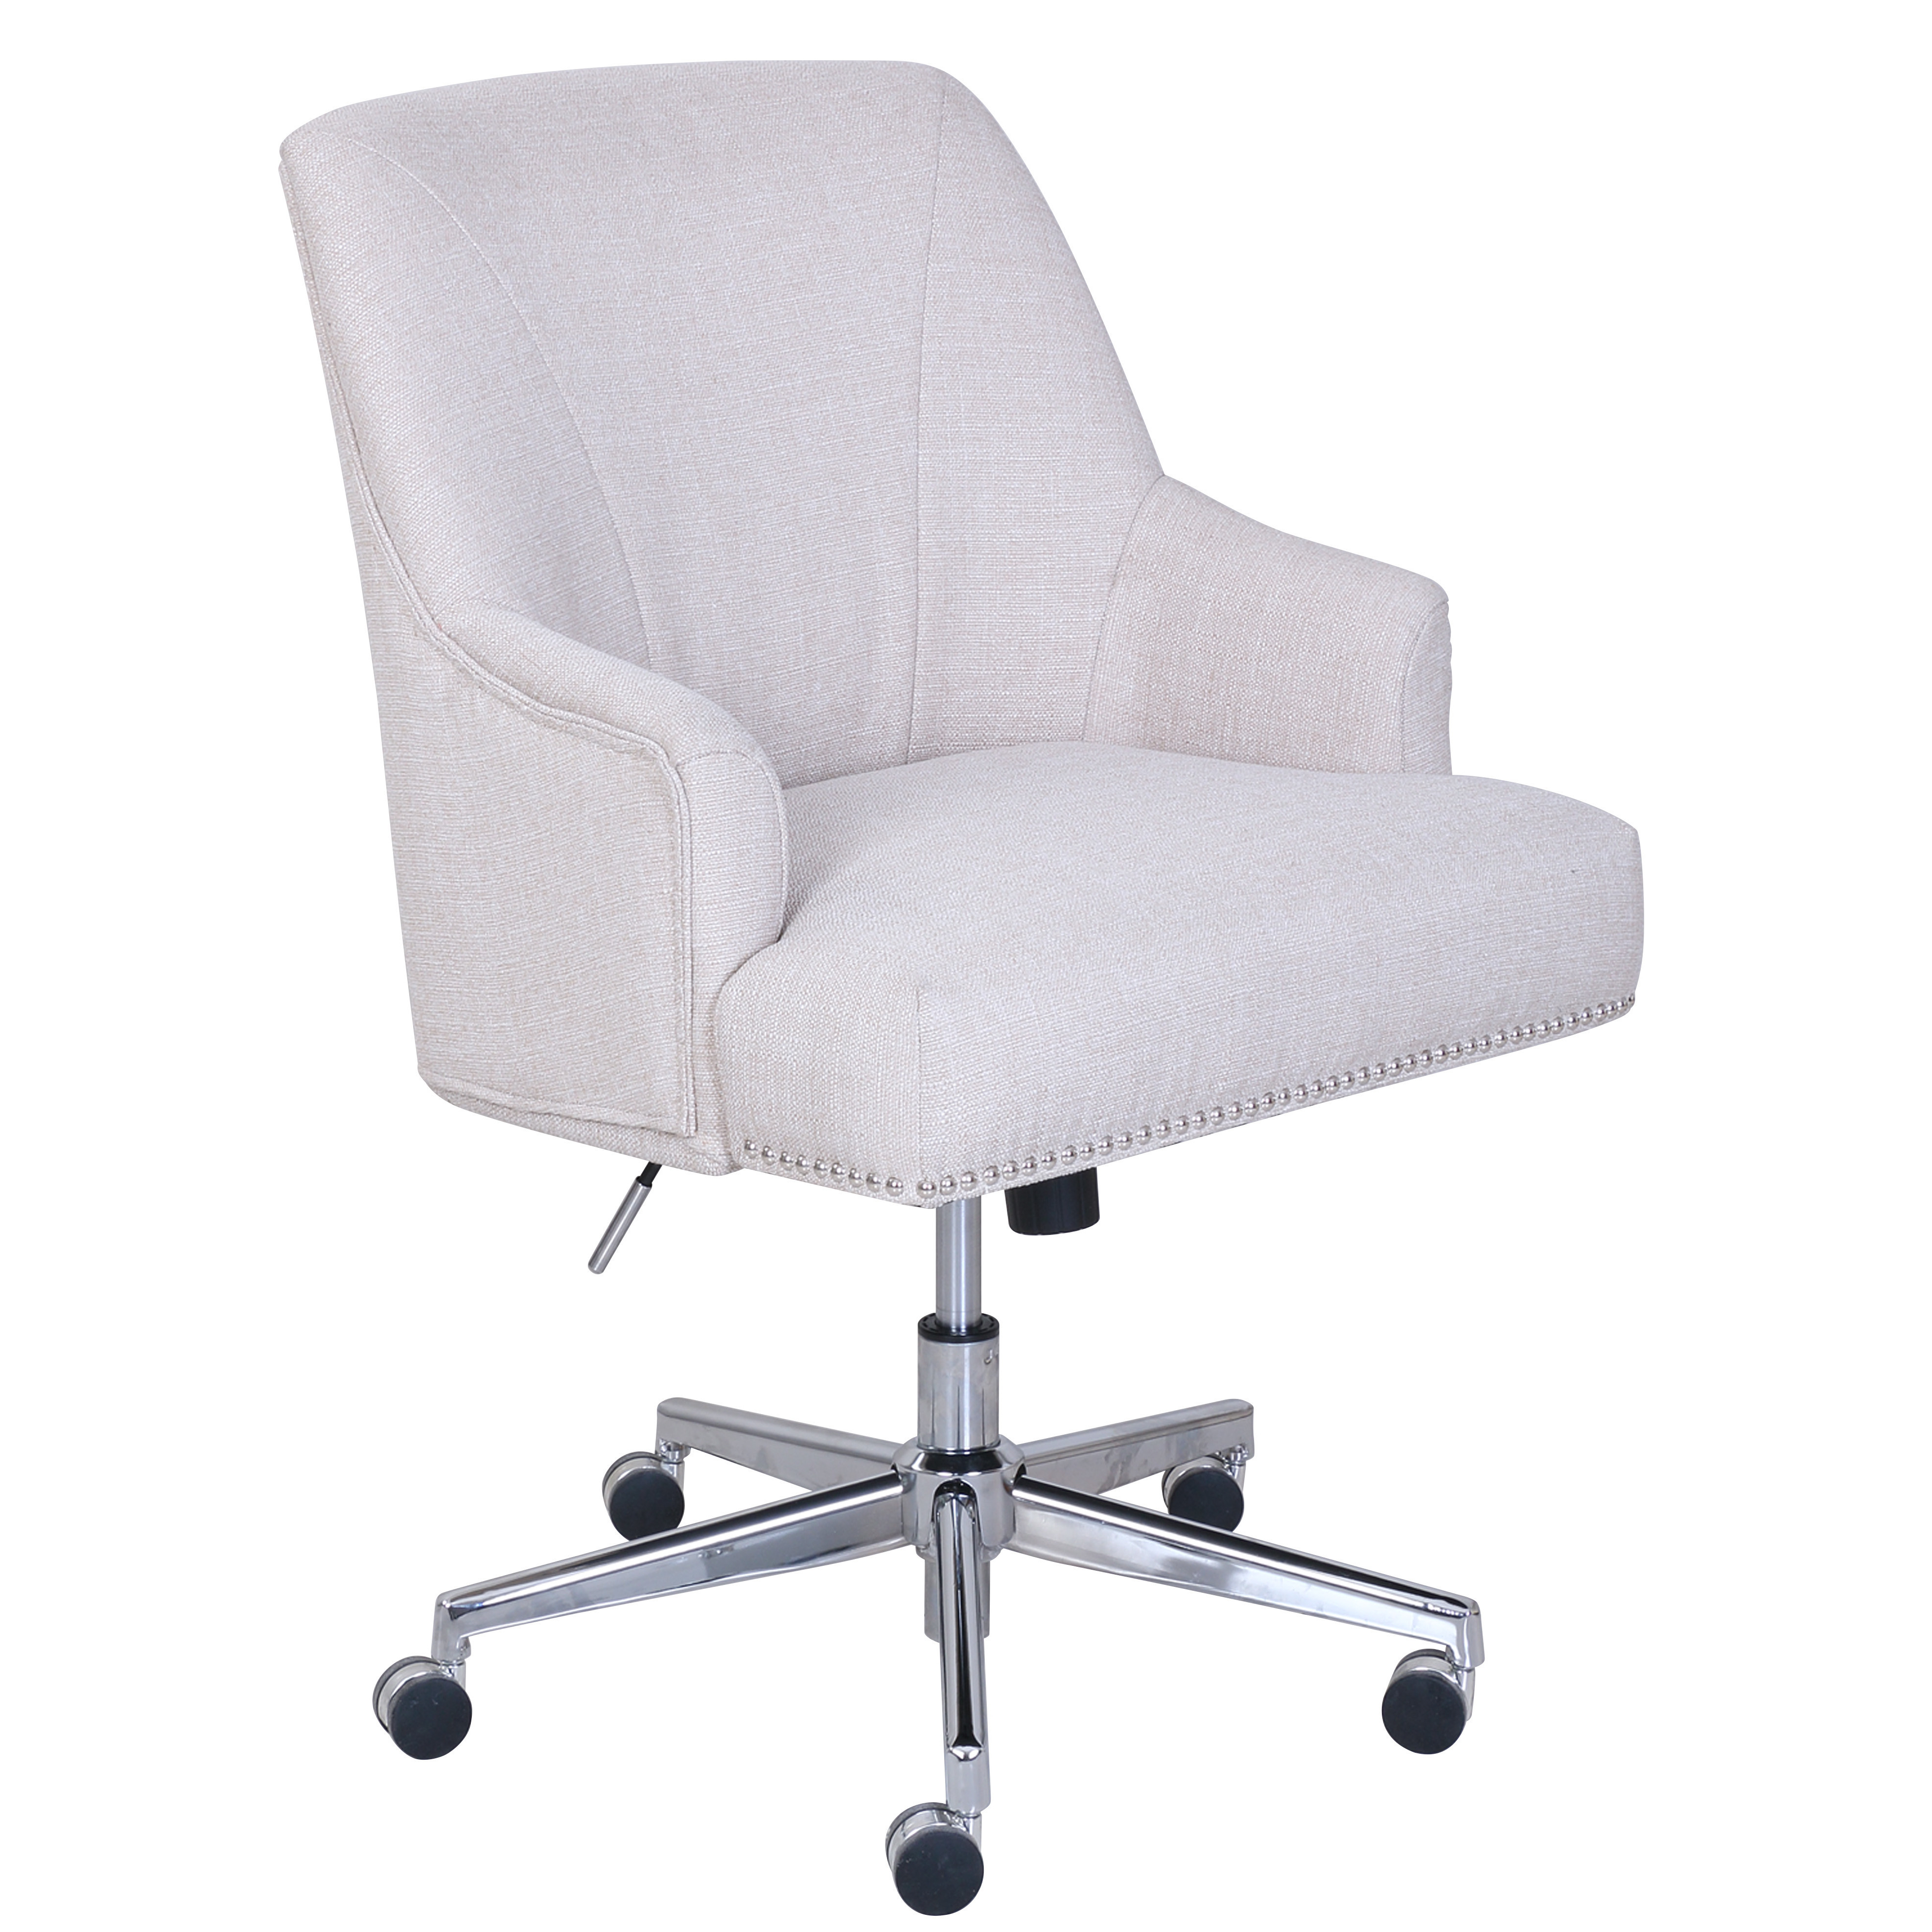 Best ideas about Home Office Chair
. Save or Pin Serta at Home Serta Leighton Desk Chair & Reviews Now.